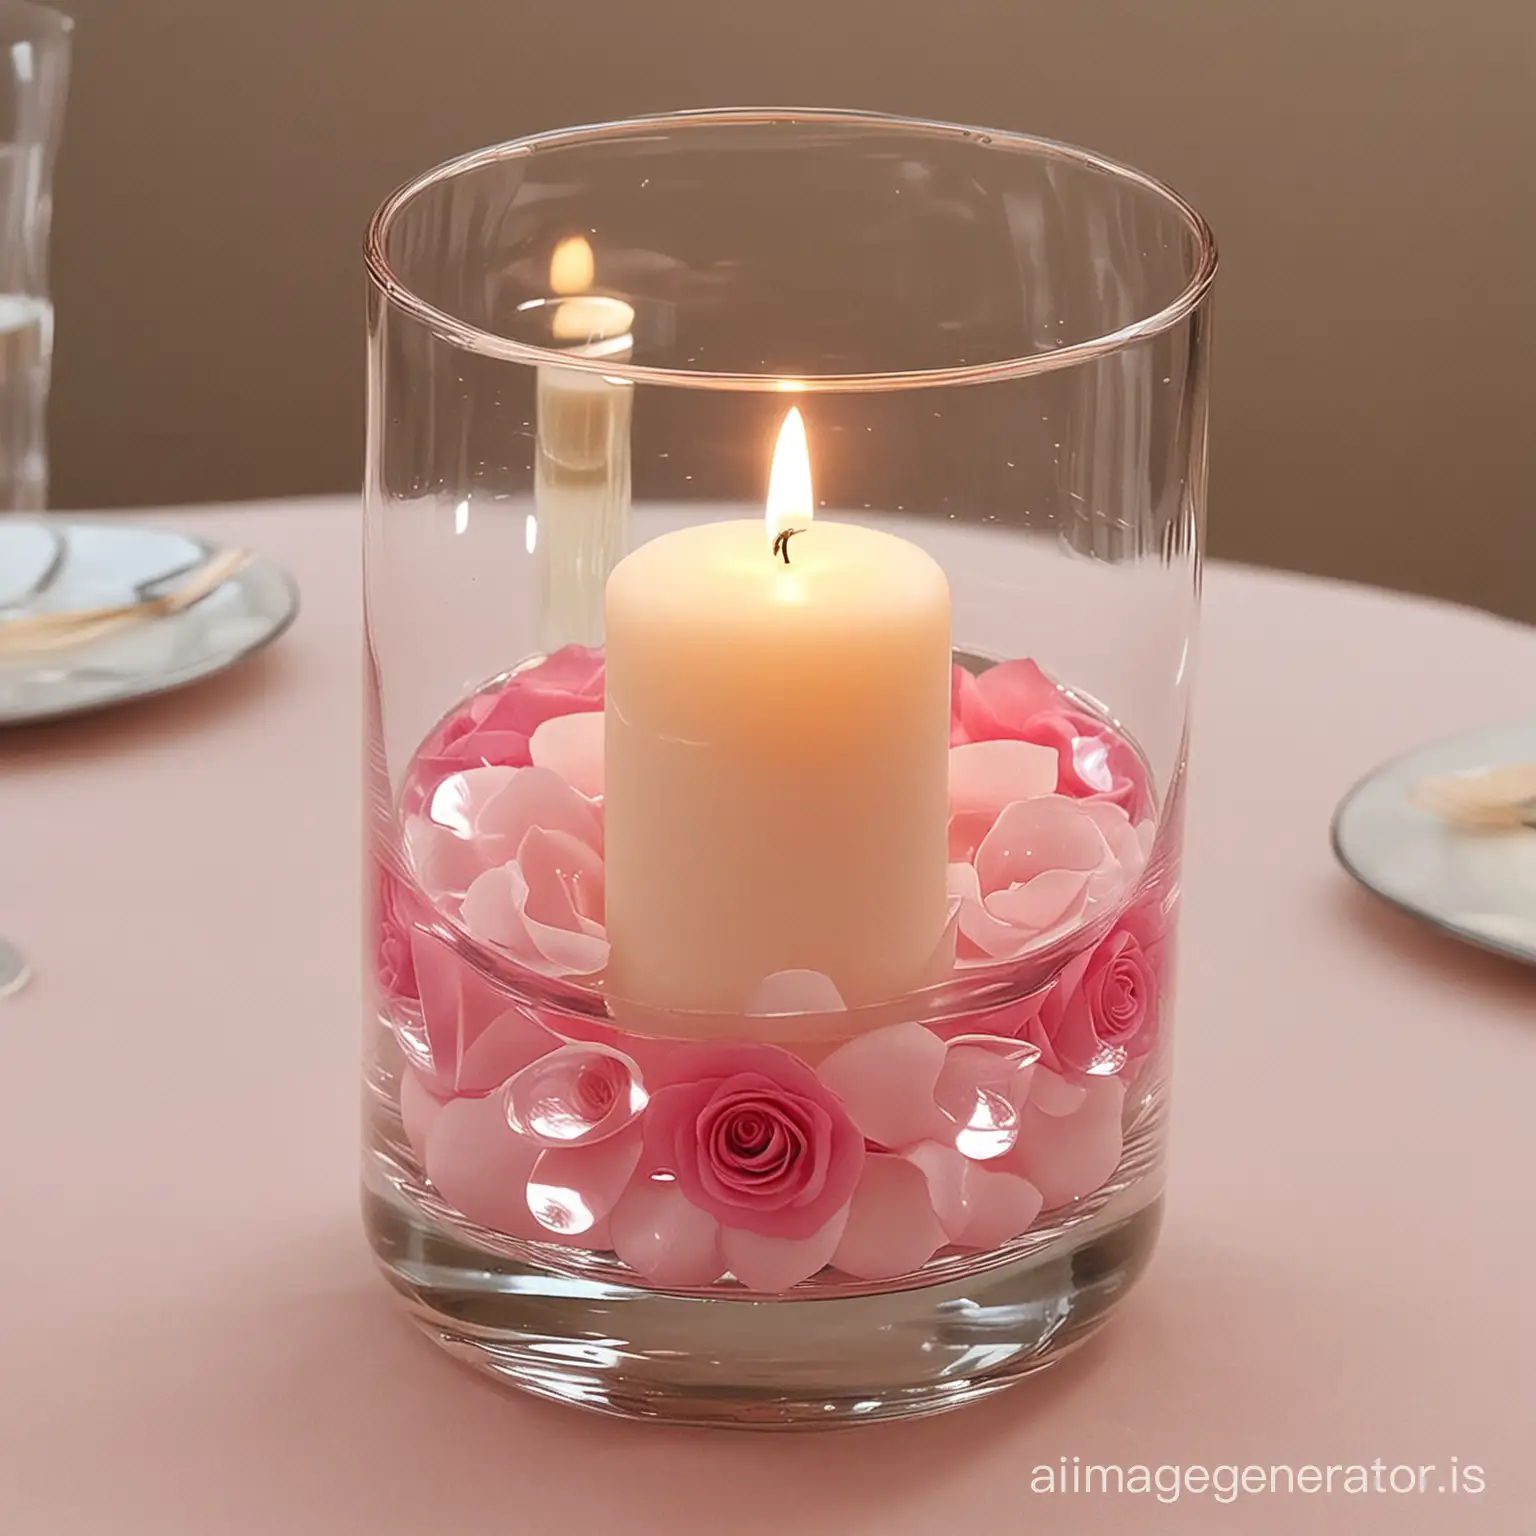 Elegant-Light-Pink-Floating-Candle-Centerpiece-for-Romantic-Ambiance